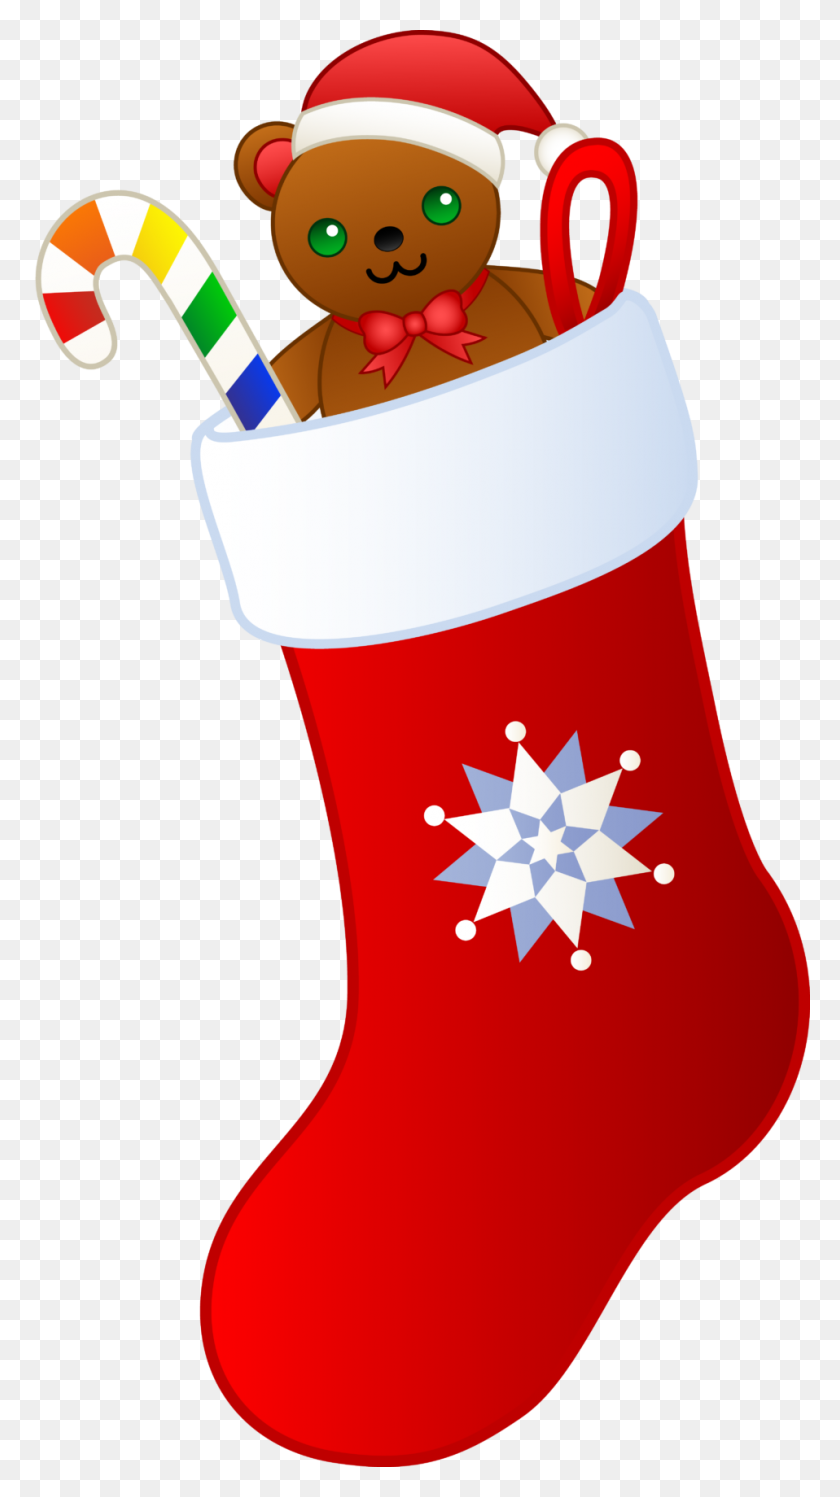 958x1766 Christmas Stockings Clipart Black And Whitechristmas Stocking Clip - Christmas Stocking Clipart Black And White